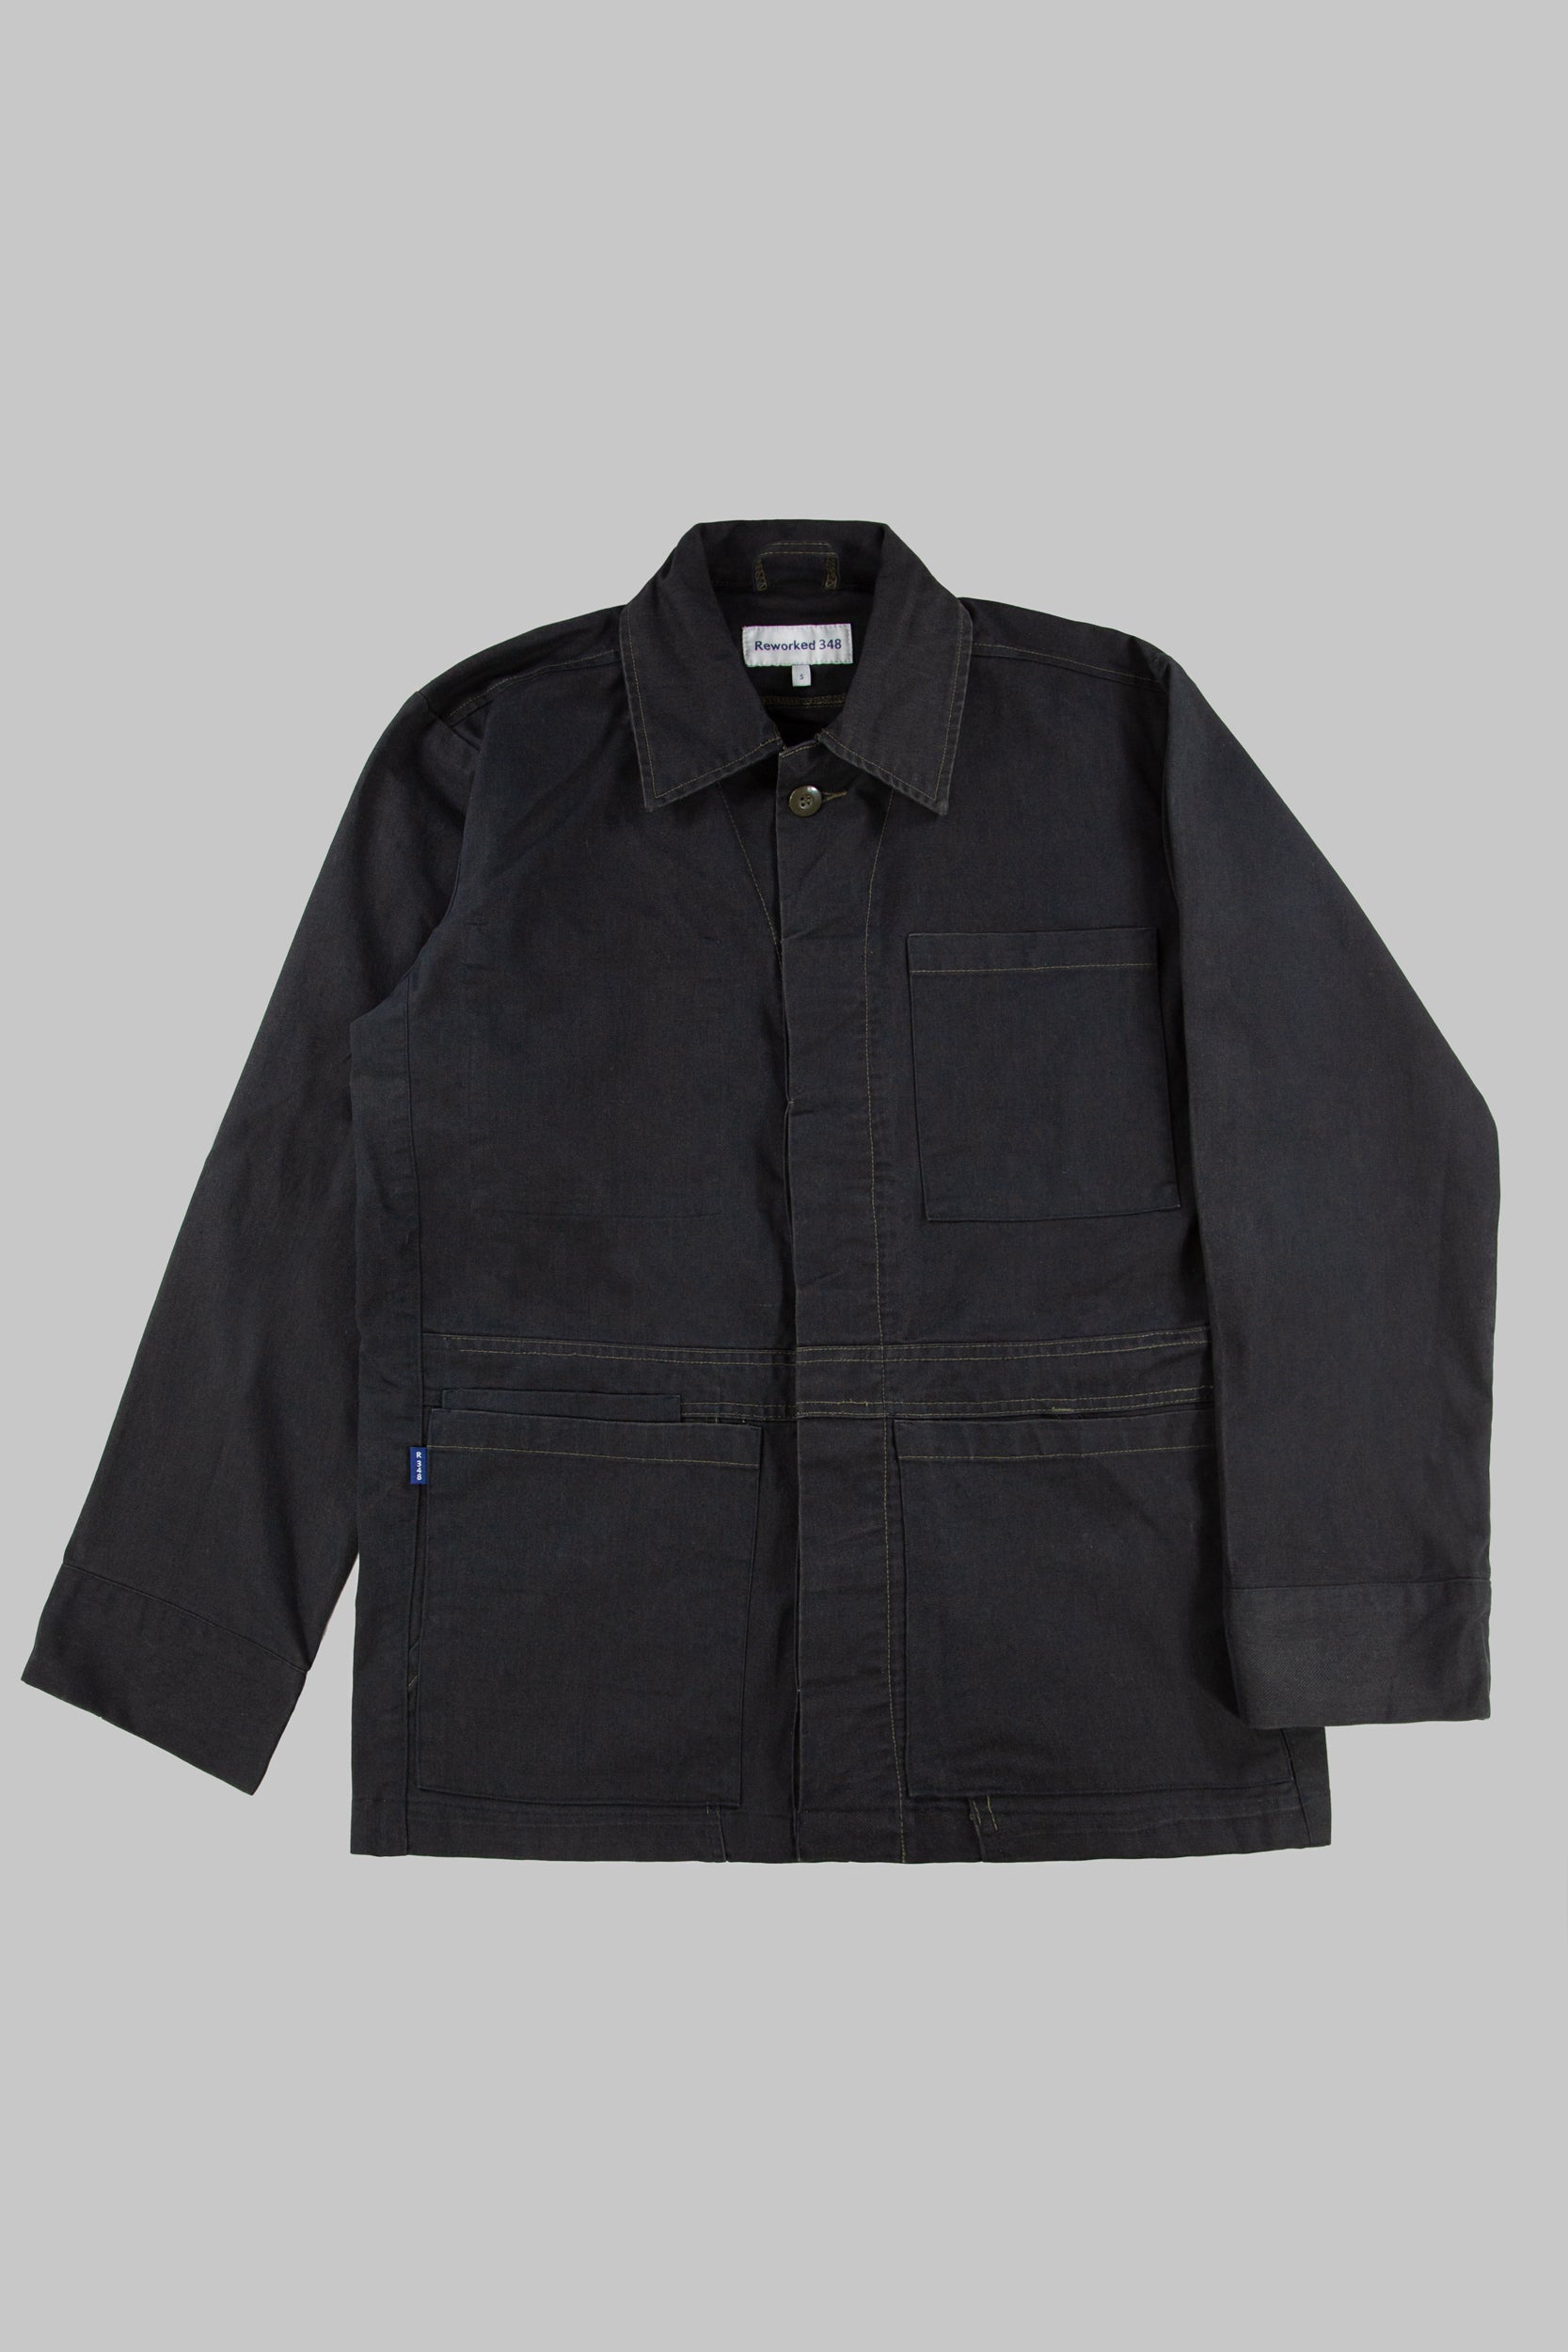 Dutch Coverall Jacket Anthracite MK2